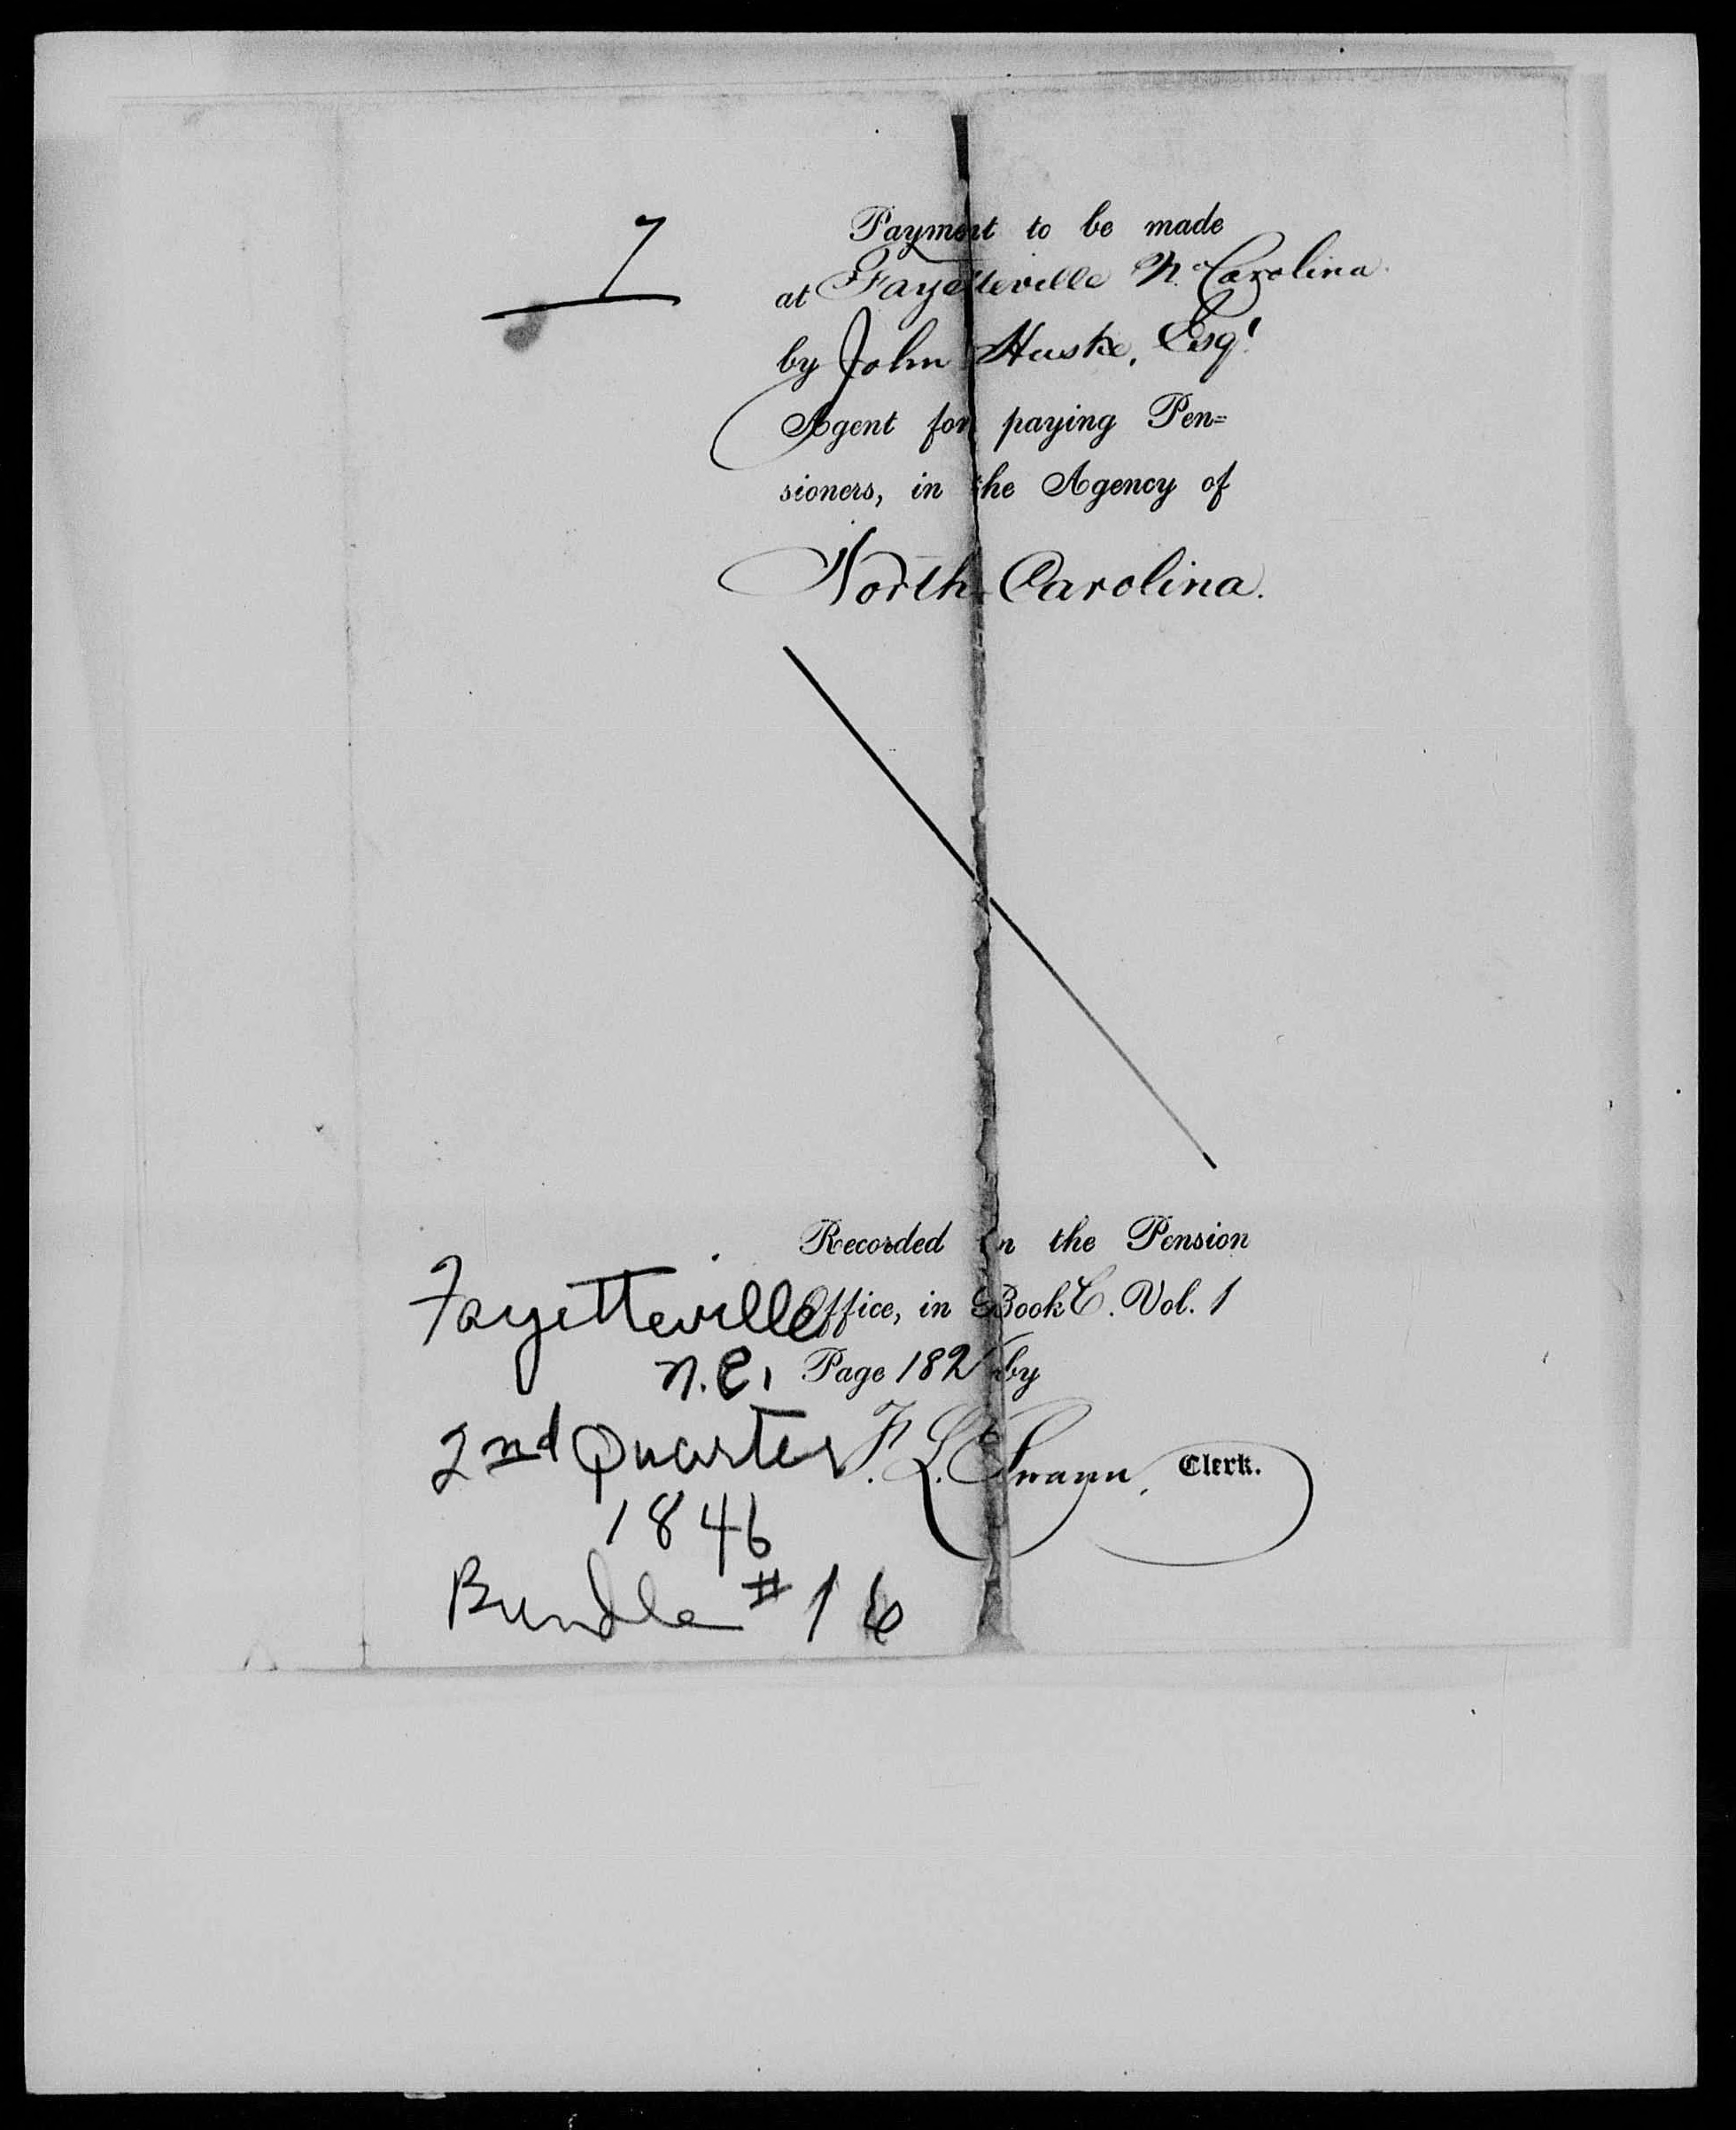 Authorization of Pension Claim from William Wilkins for Ruth Edwards, 9 December 1844, page 2